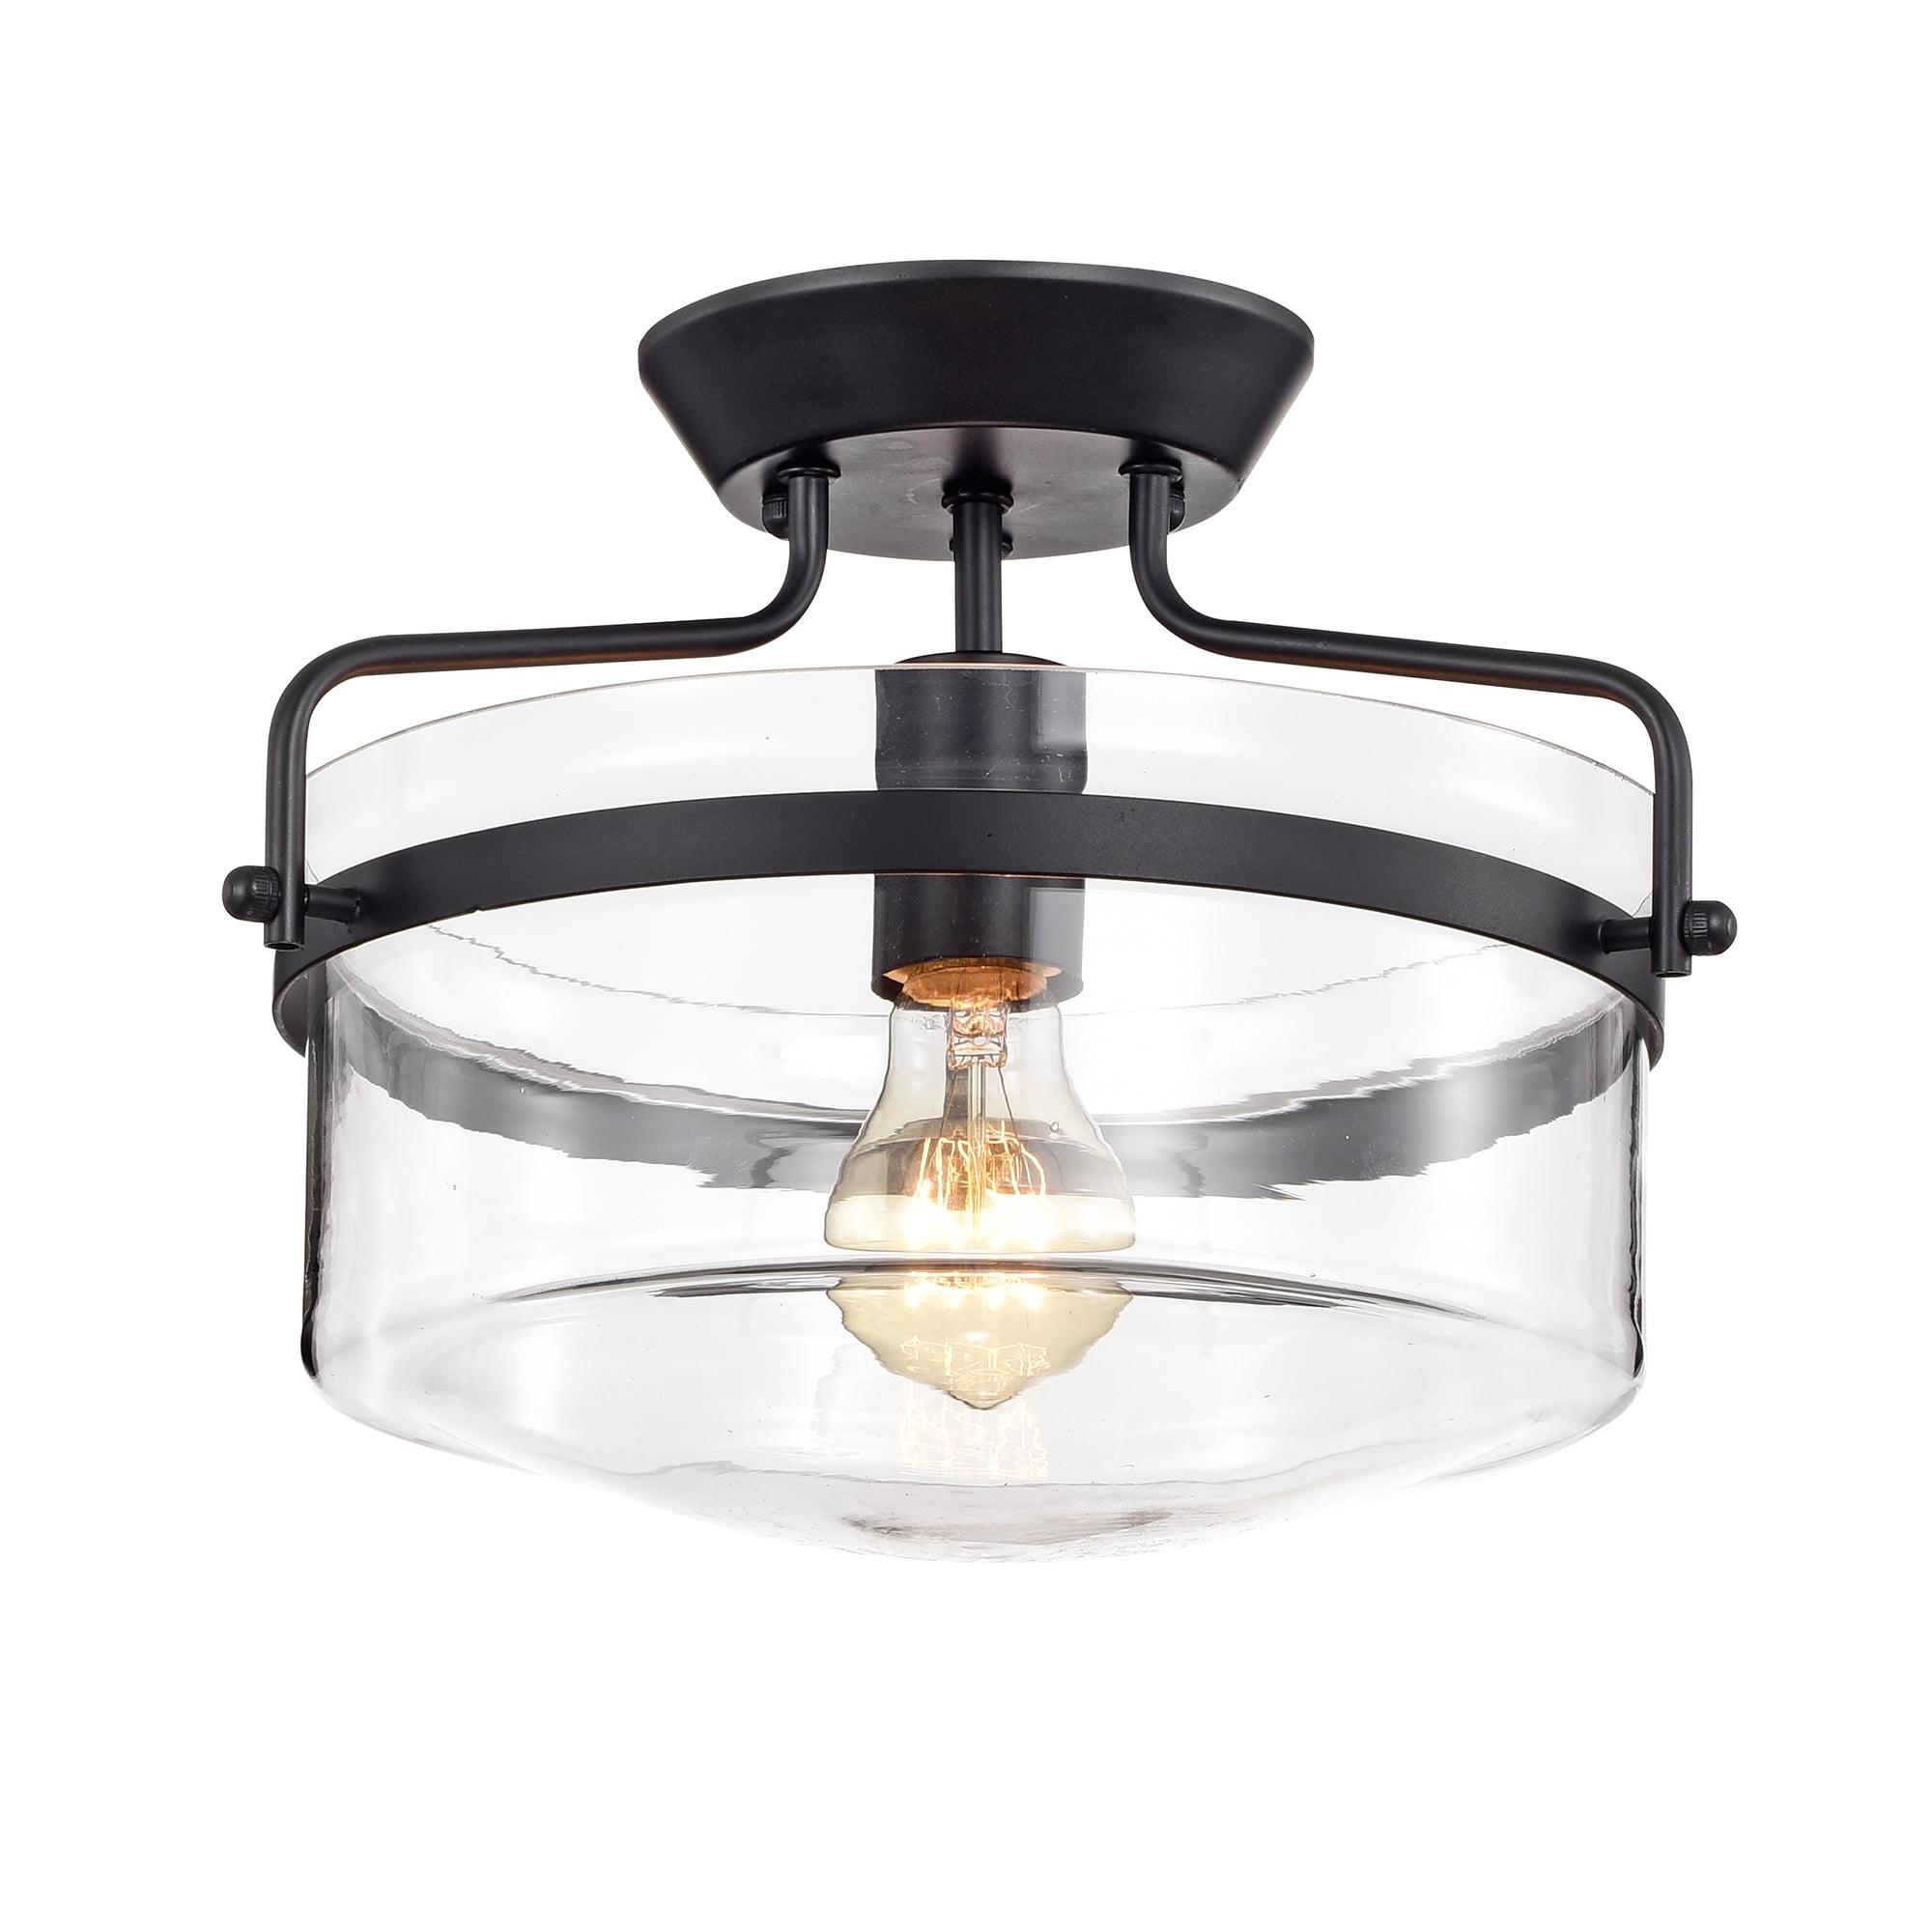 Merwin Matte Black 13" Semi-Flush Industrial Ceiling Lamp with Clear Glass Bowl